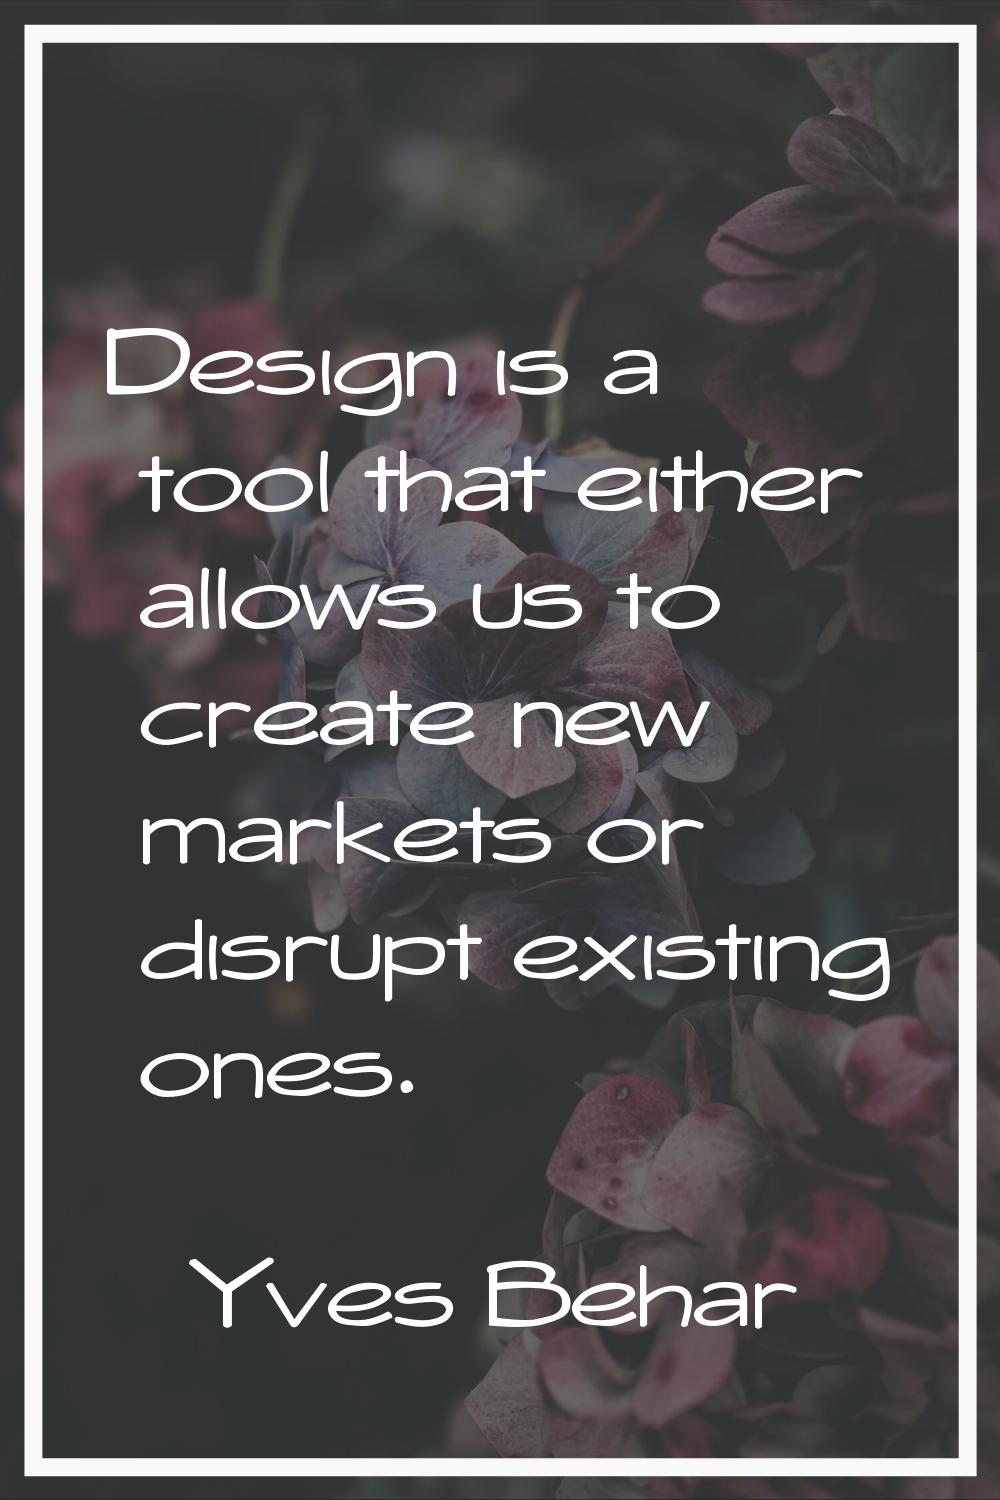 Design is a tool that either allows us to create new markets or disrupt existing ones.